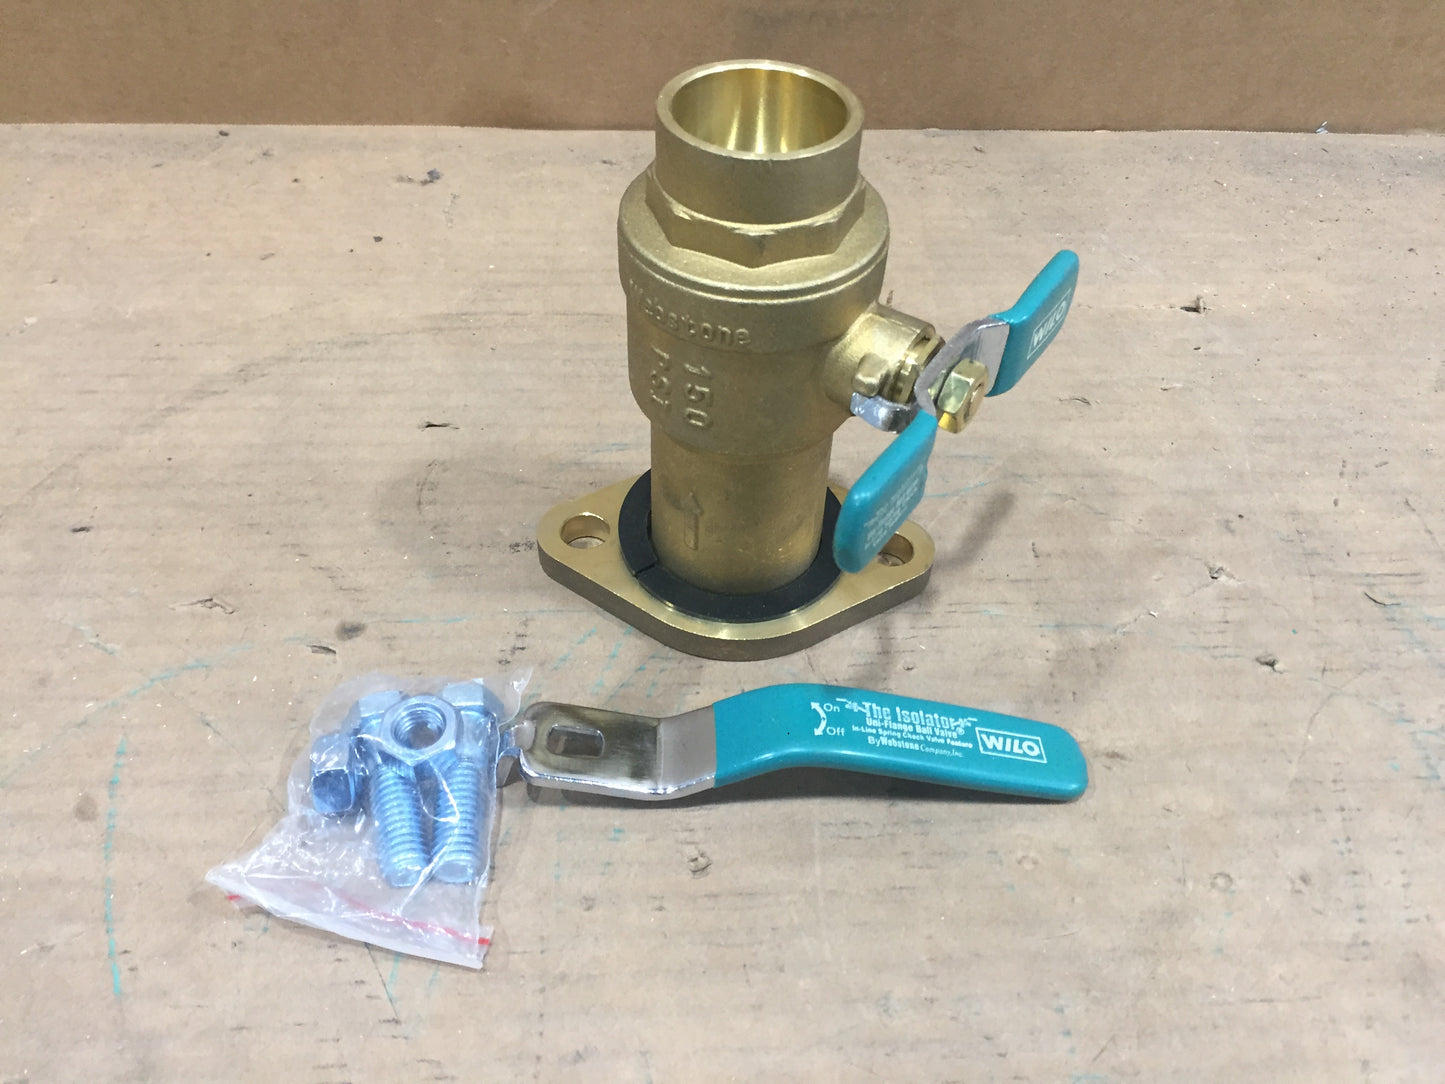 1-1/4" SWEAT X FLANGE BALL VALVE W/ IN-LINE SPRING CHECK VALVE WITH ROTATING FLANGE